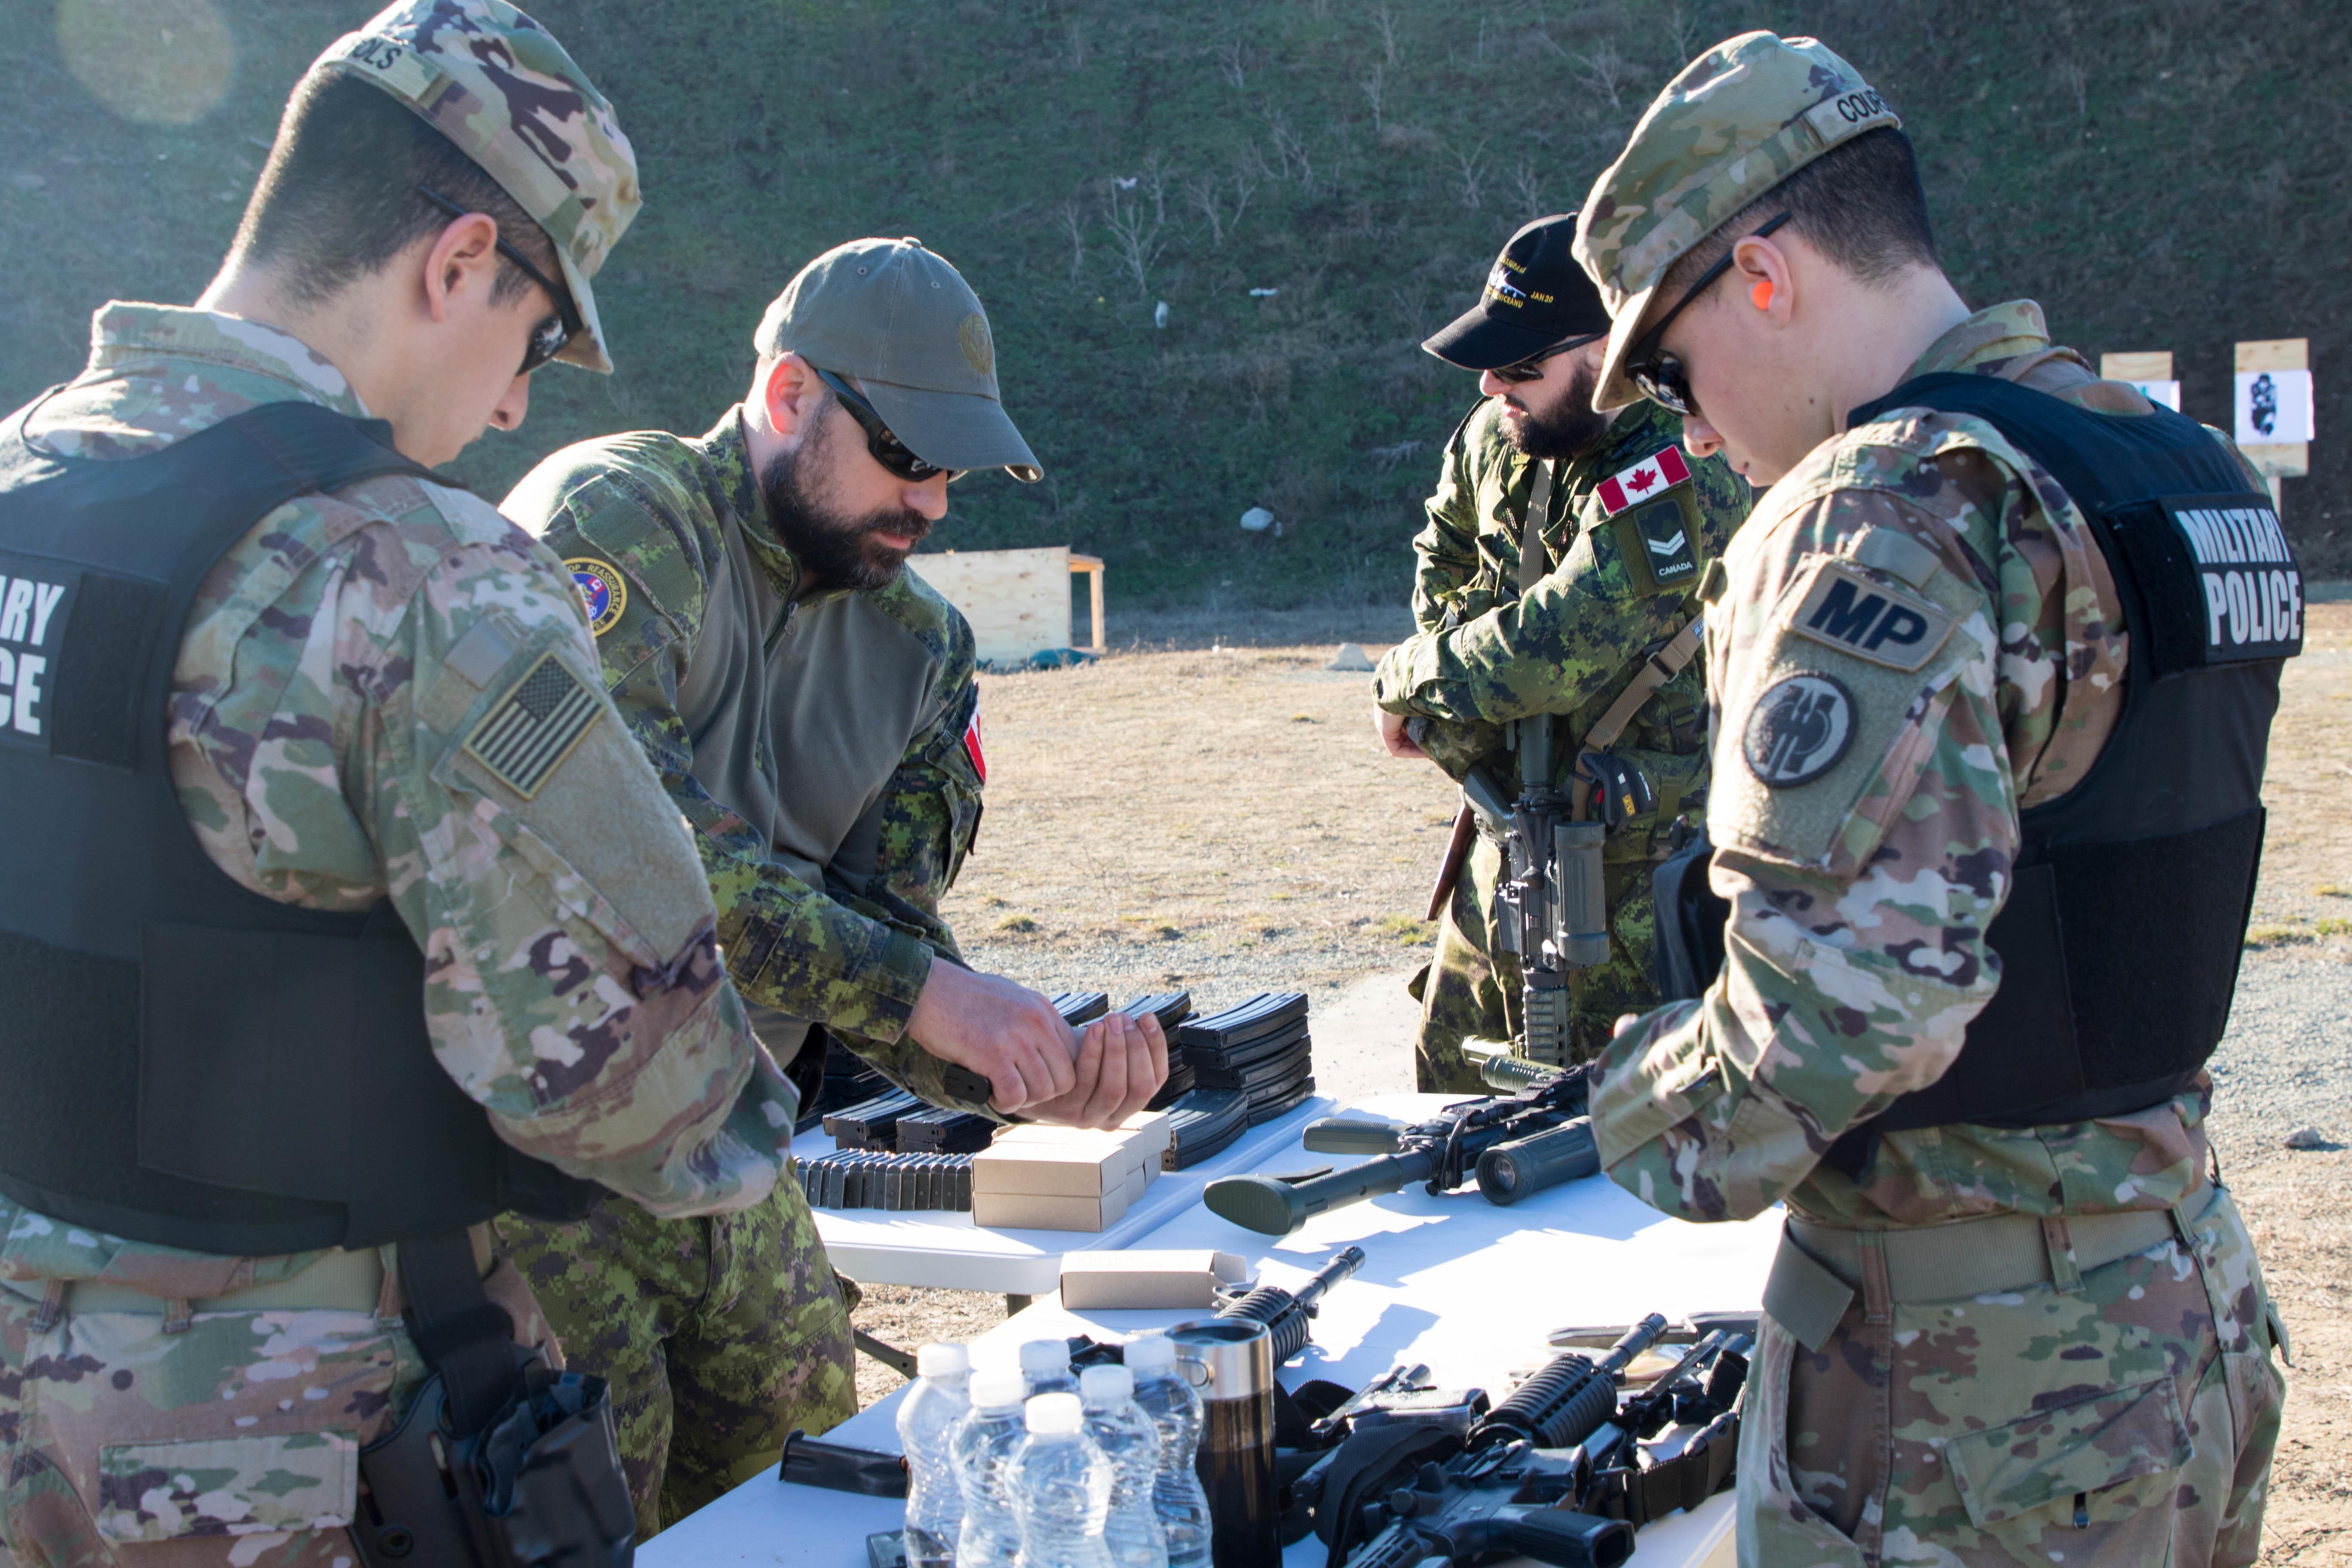 u-s-and-canadian-military-police-conduct-weapons-training-in-romania